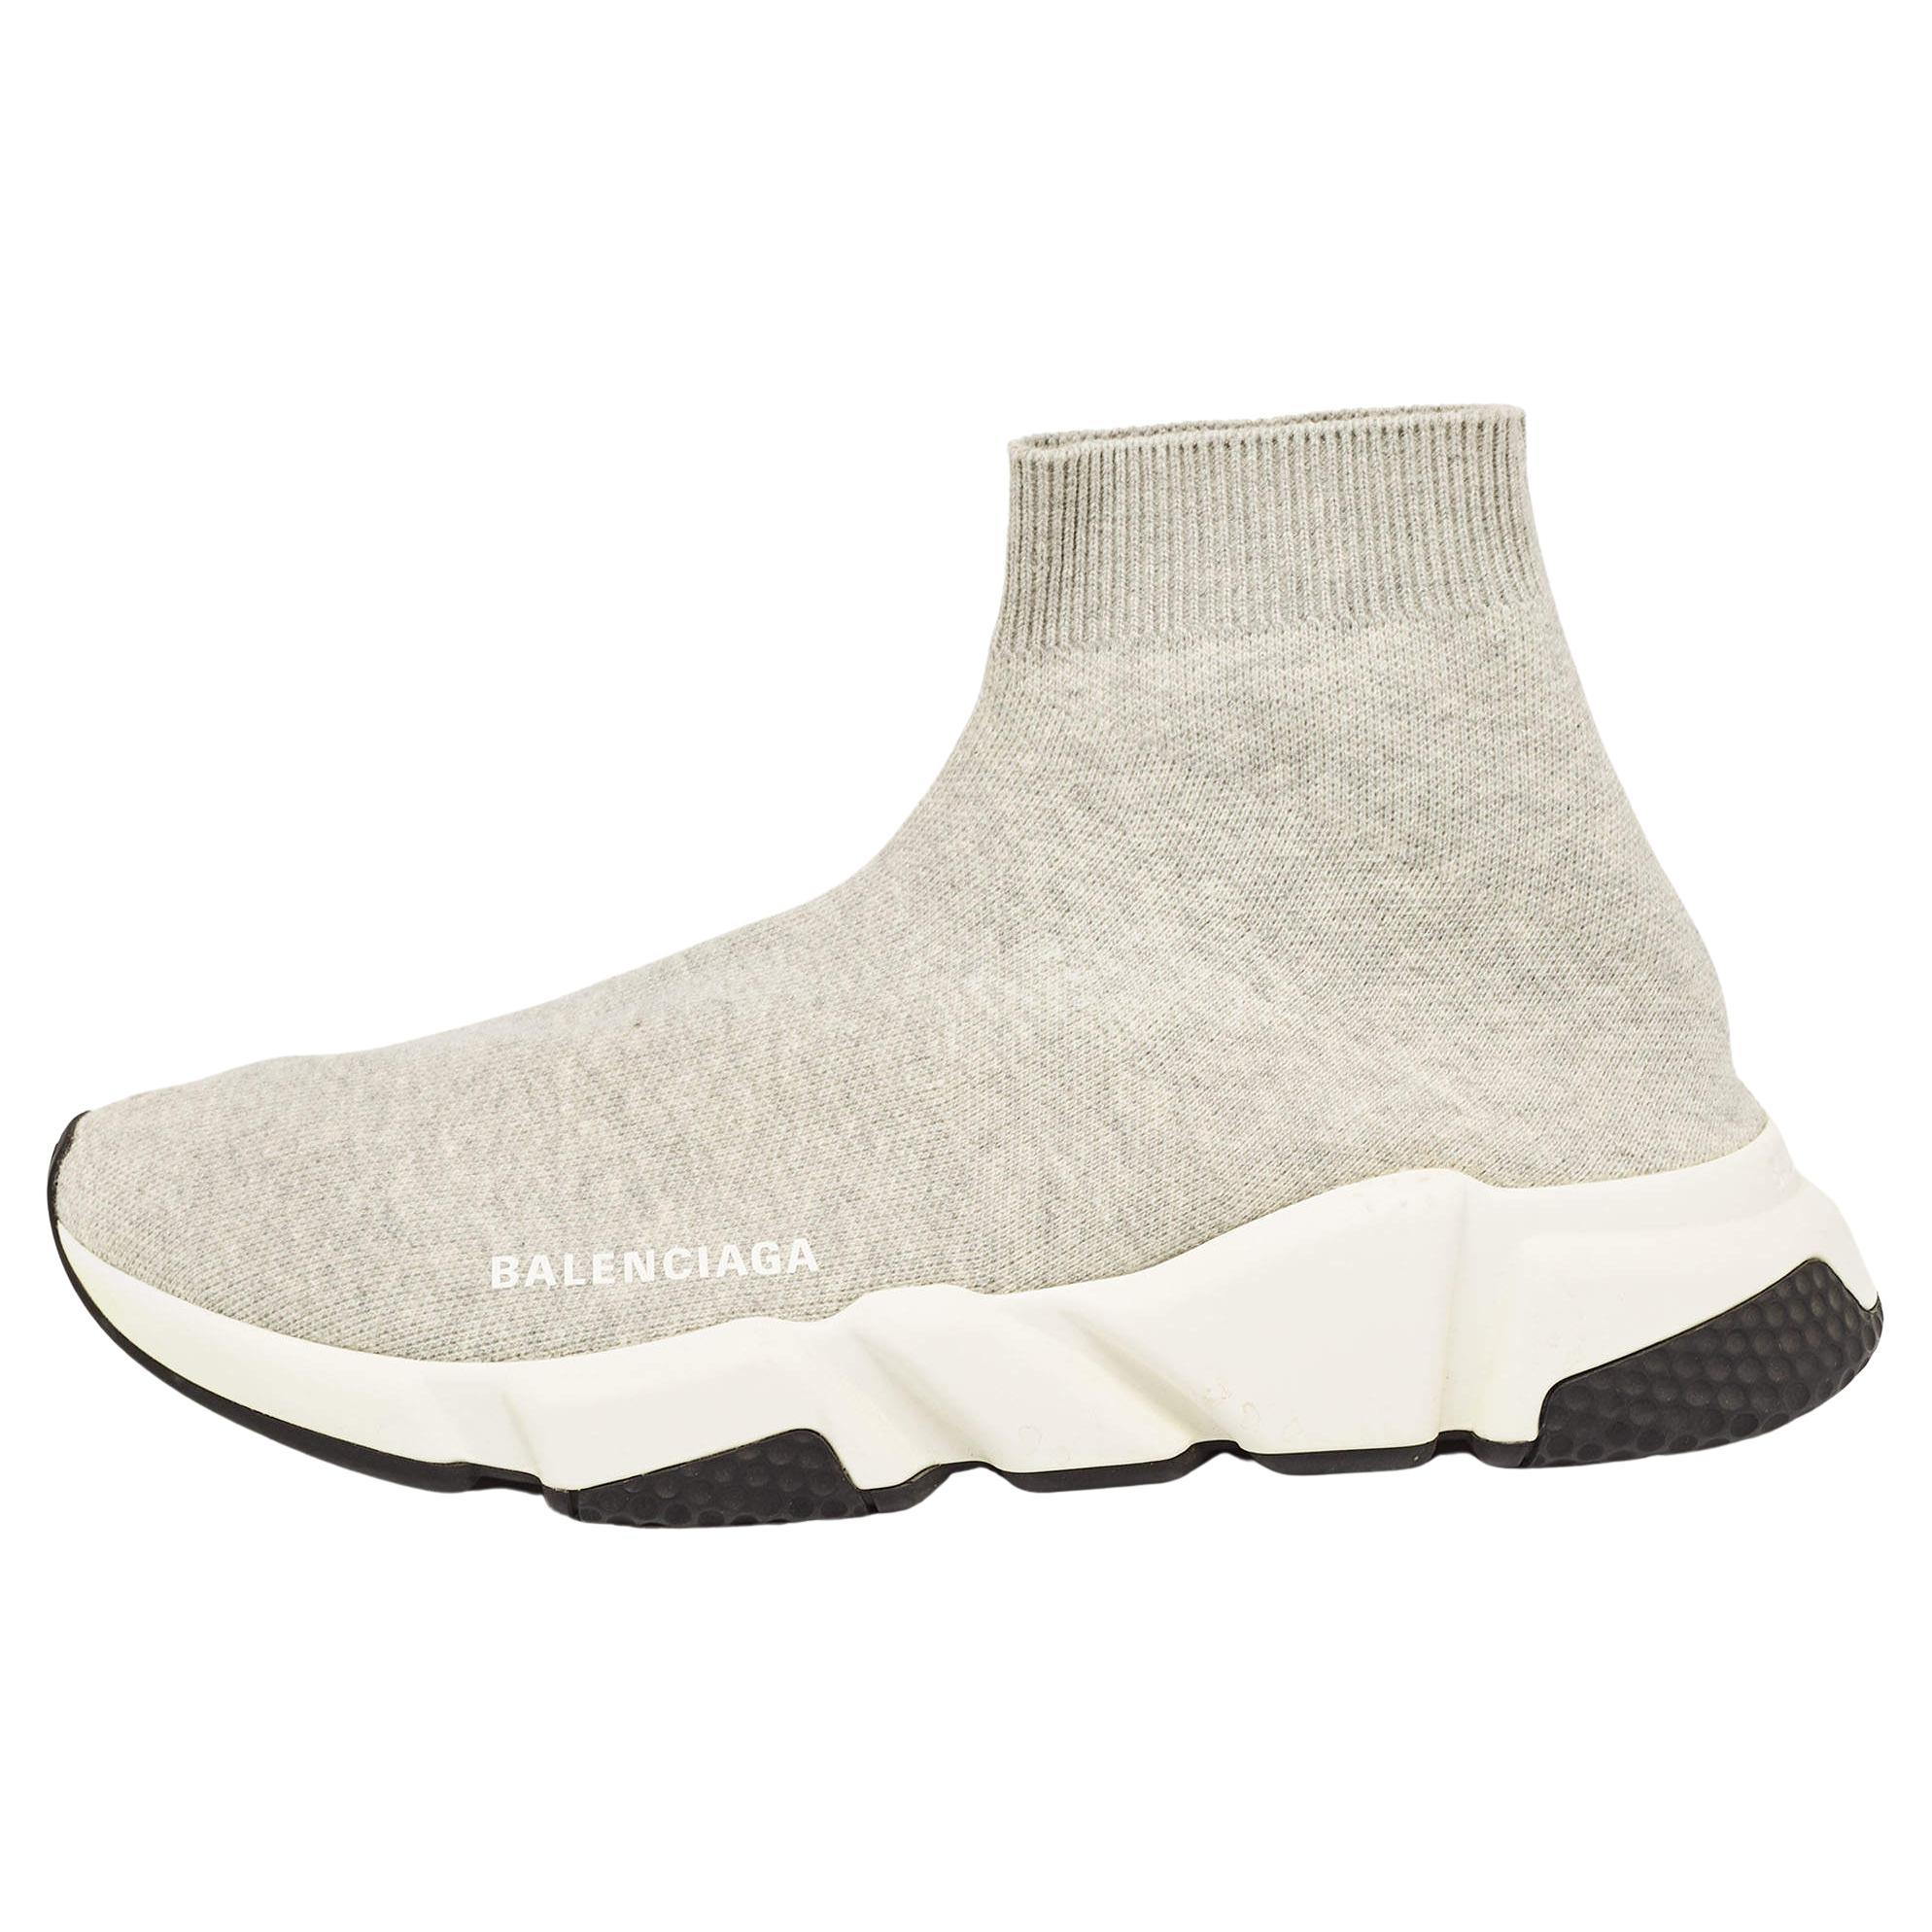 Balenciaga Grey Knit Fabric Speed Trainer Sneakers Size 41 For Sale